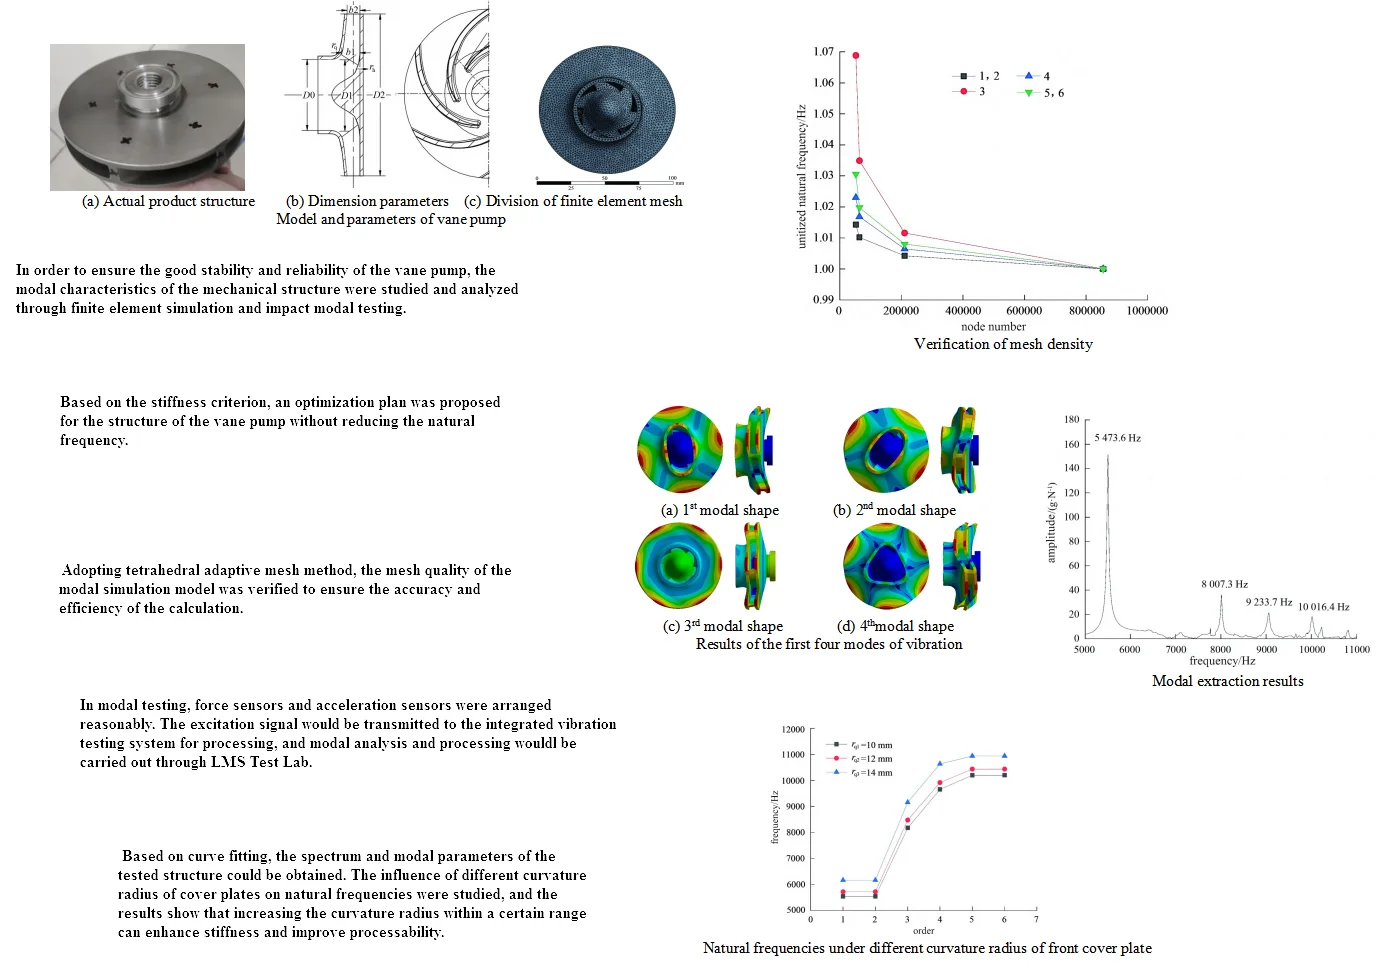 Optimization of vane pump structure based on modal characteristic analysis